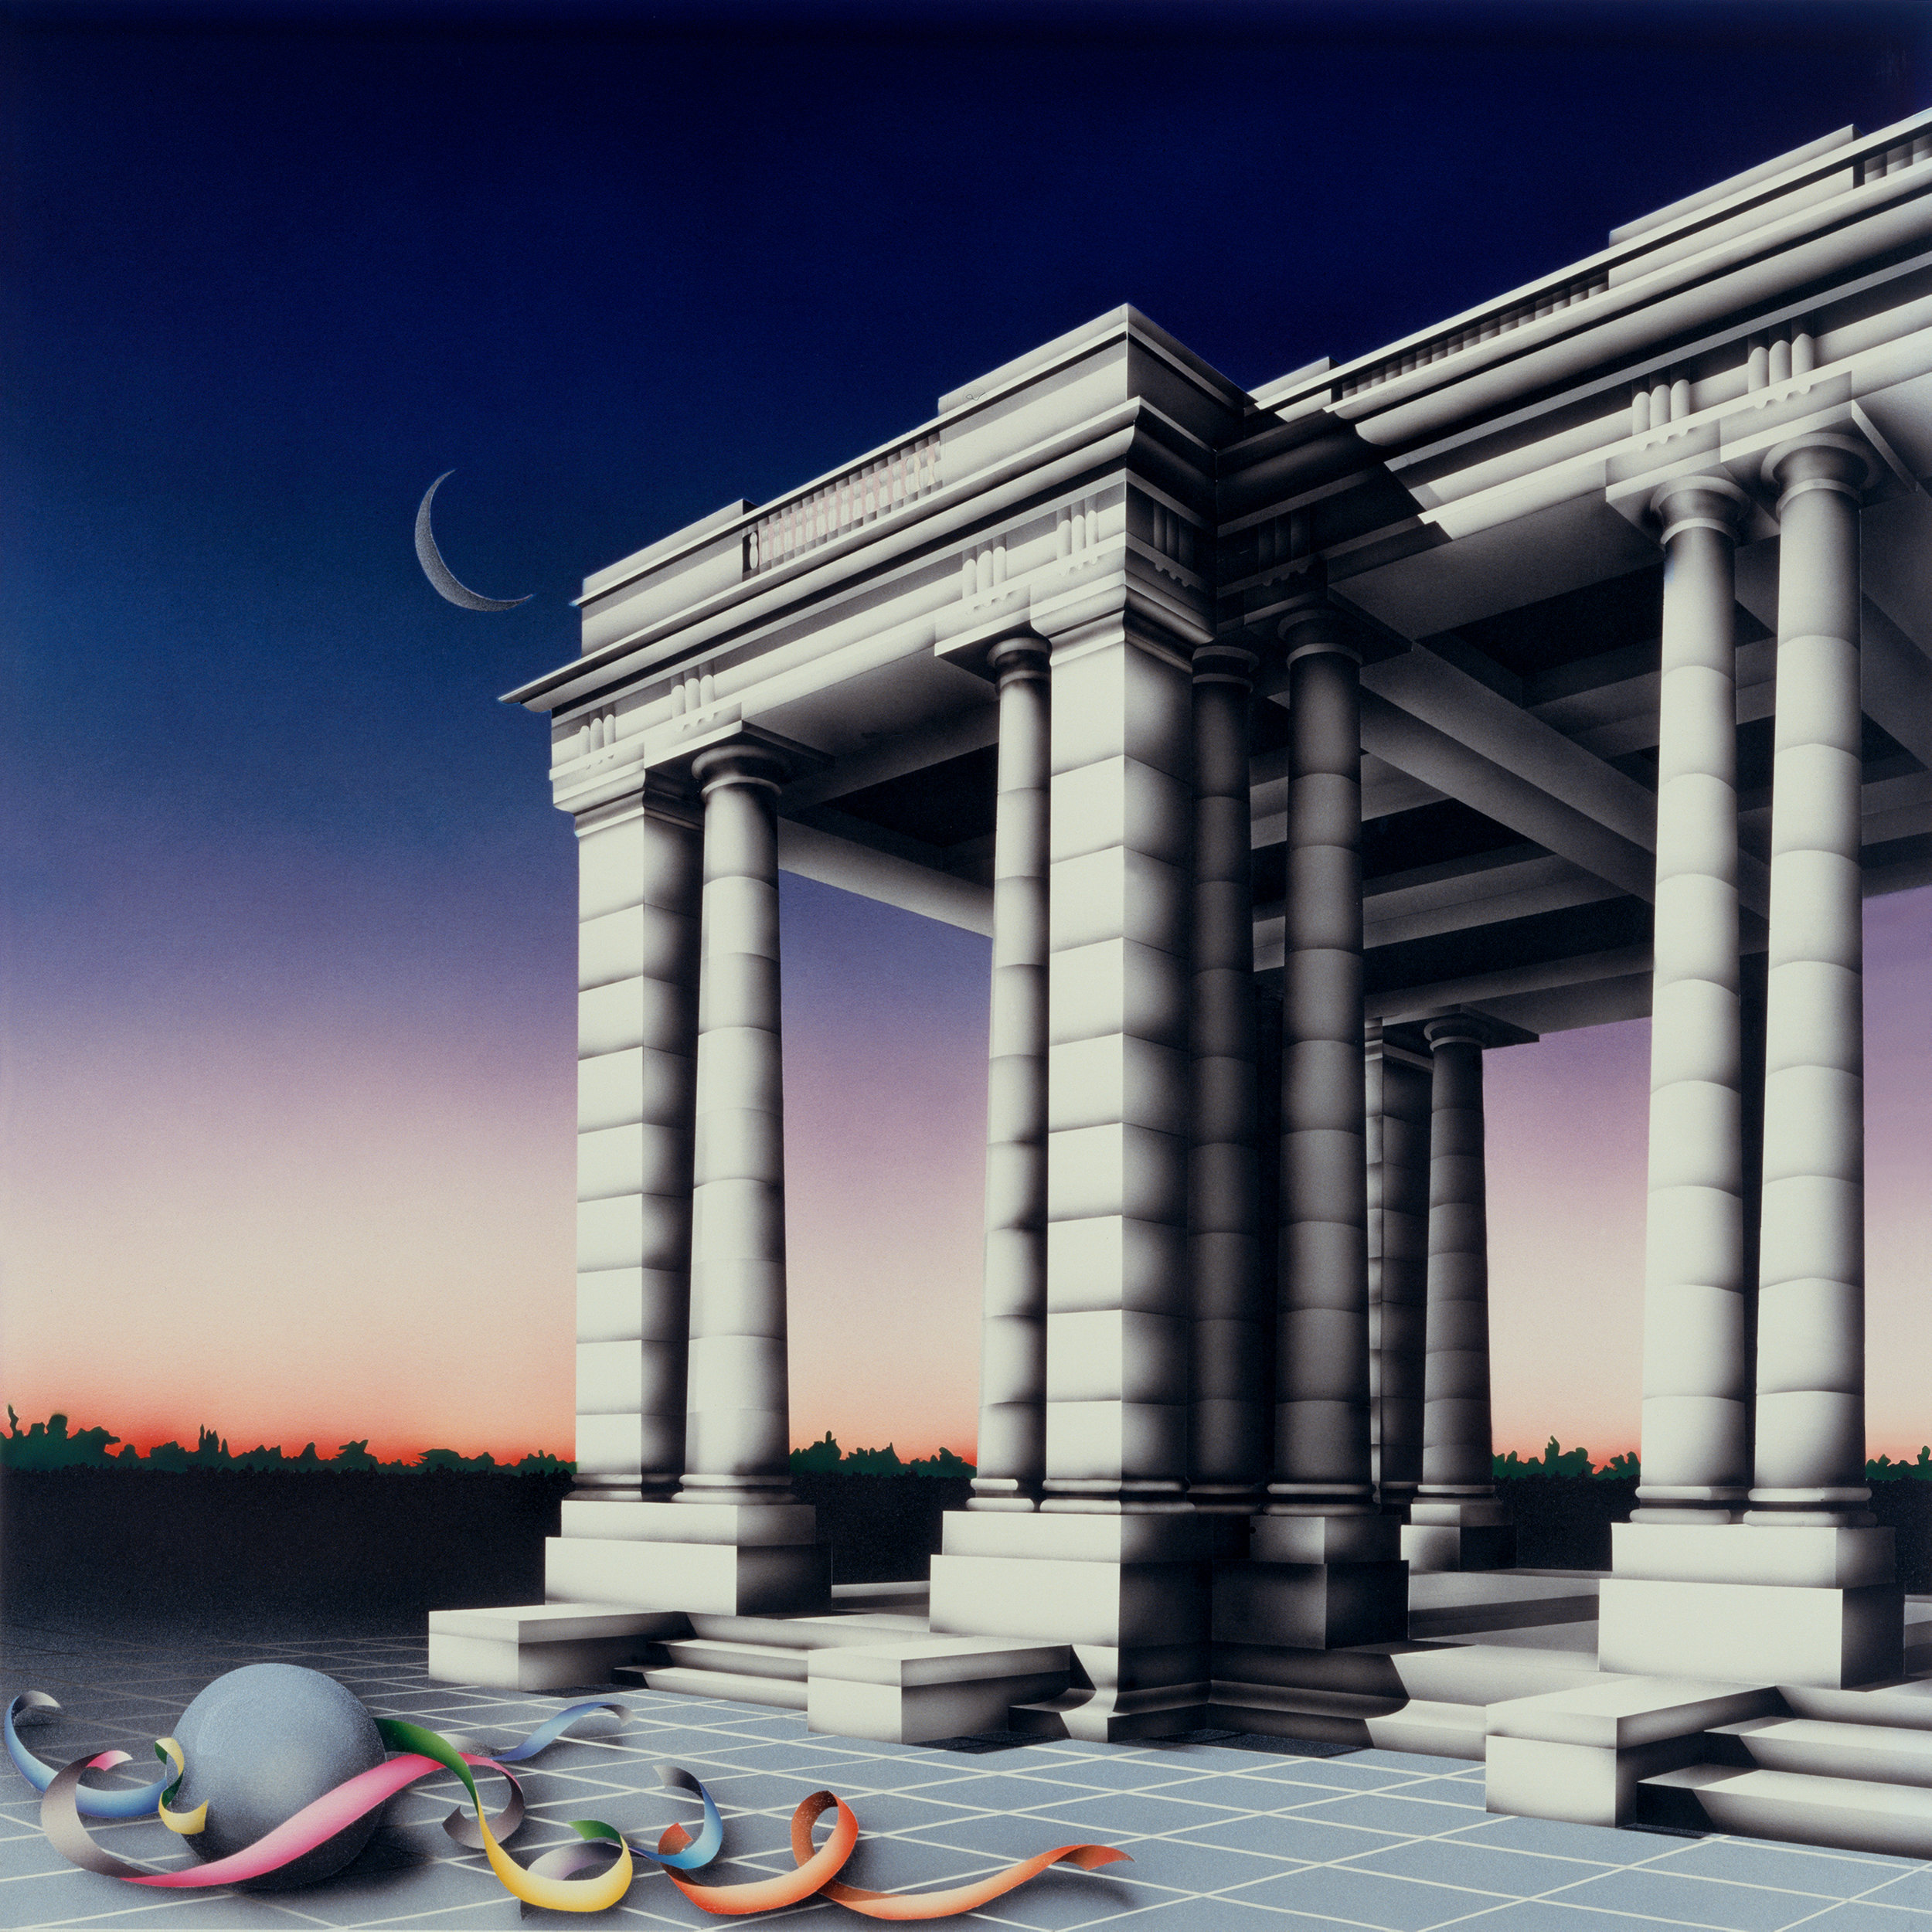 Enchanted Pavilion, 1985: Acrylic and varnish on board,  27 x 27 in  (69 x 69 cm)